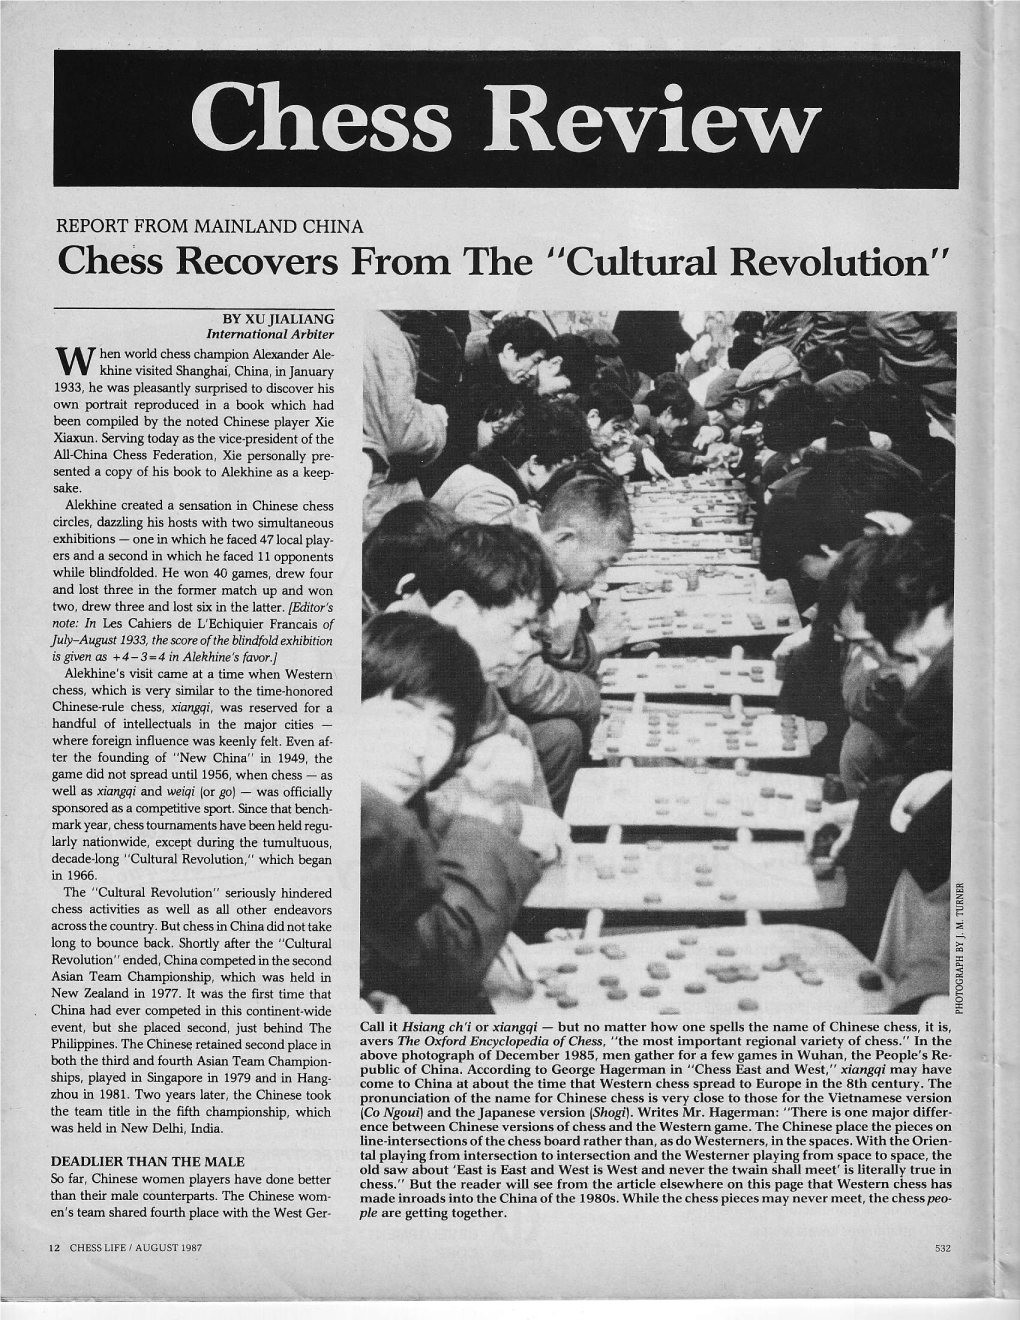 Chess Recovers from the "Cultural Revolution"